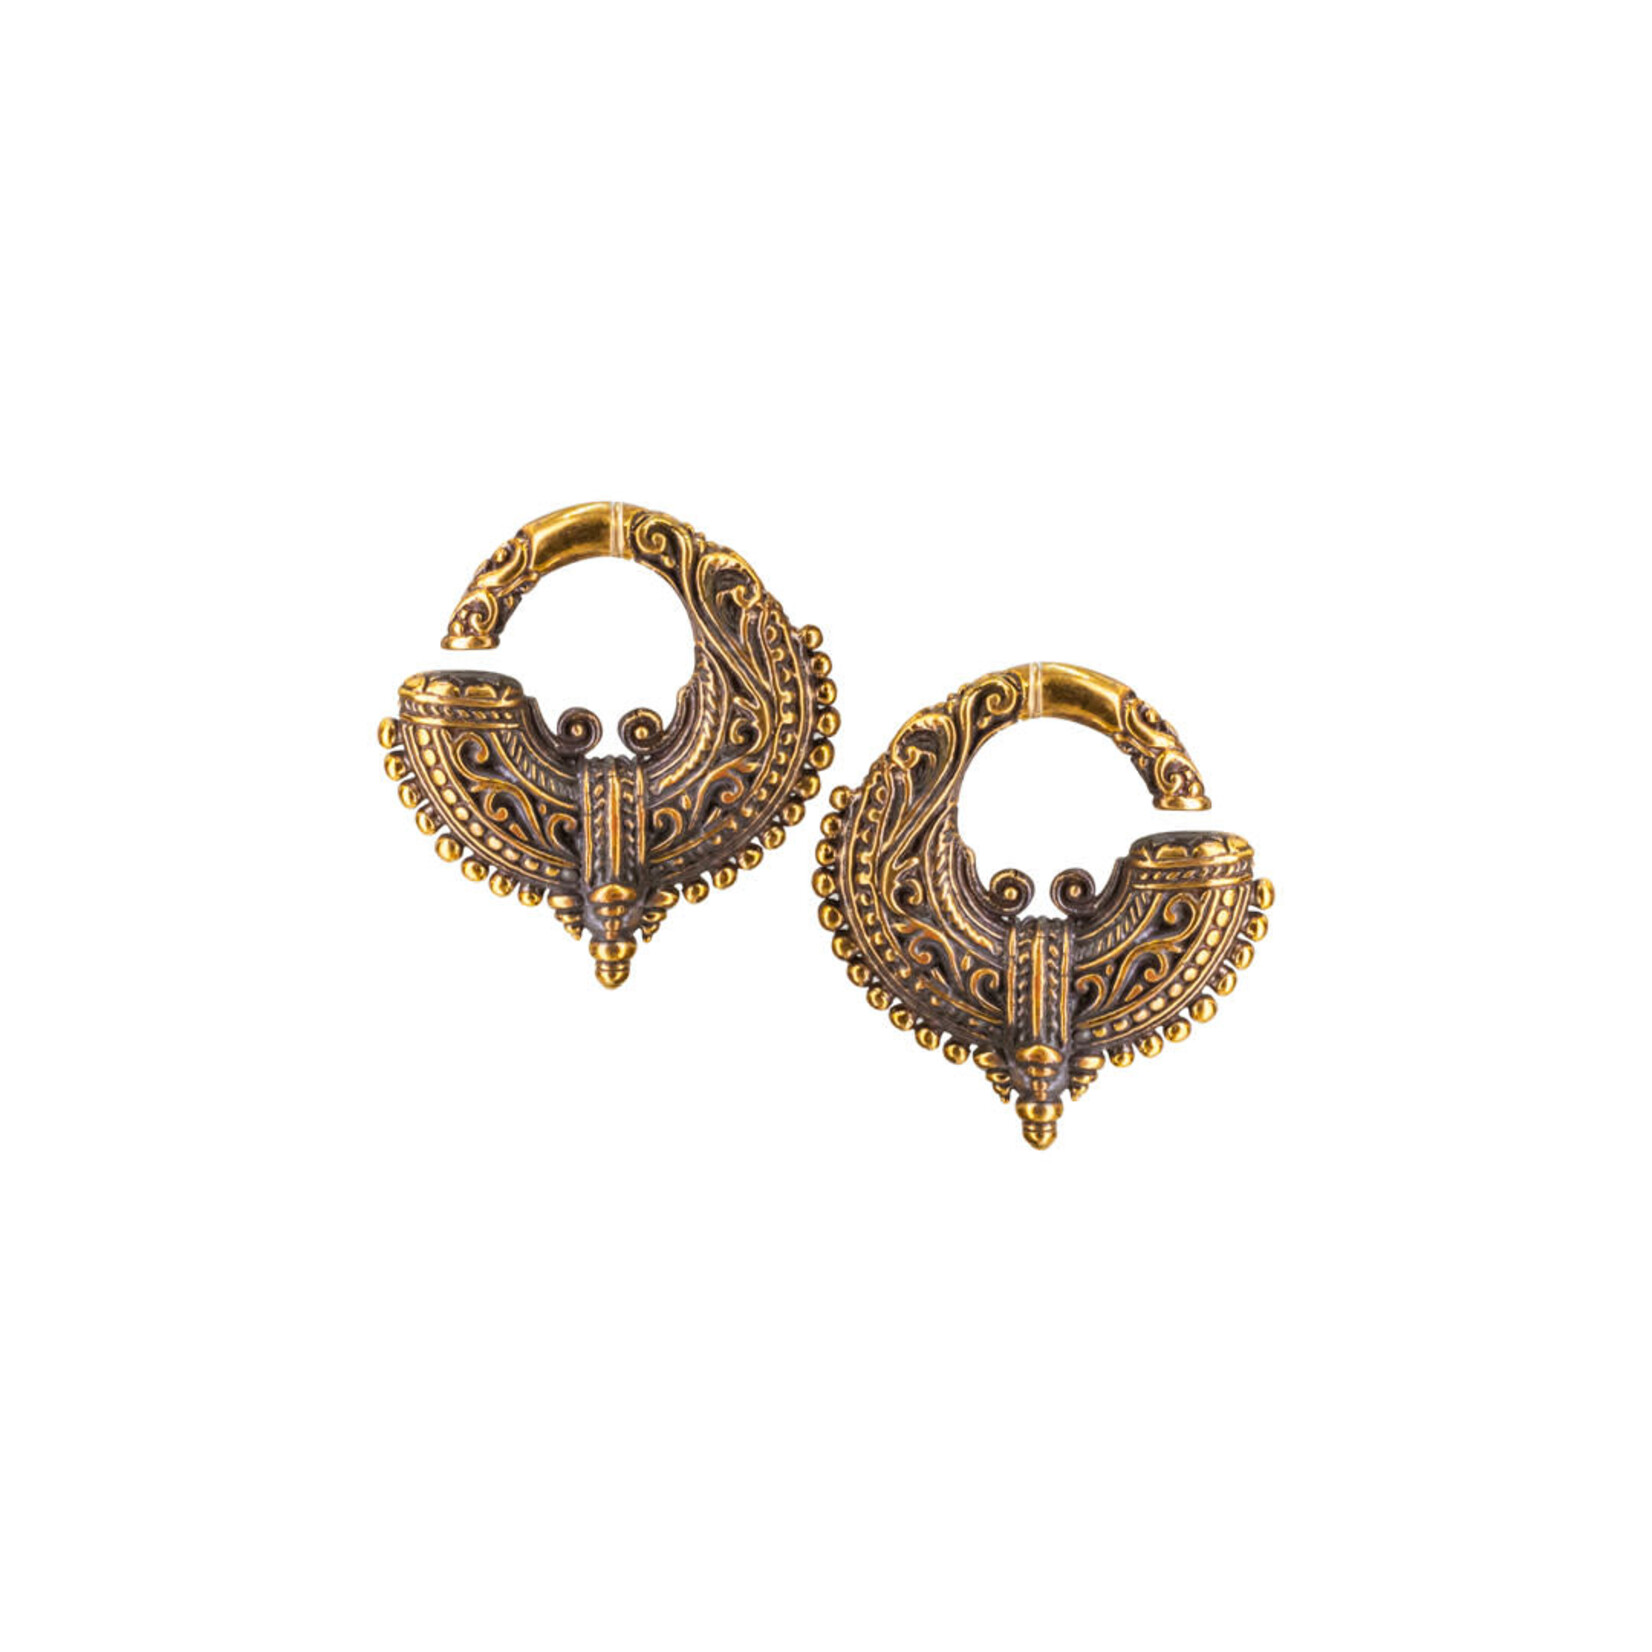 Evolve Body Jewelry Evolve bronze "Magna" ear weights